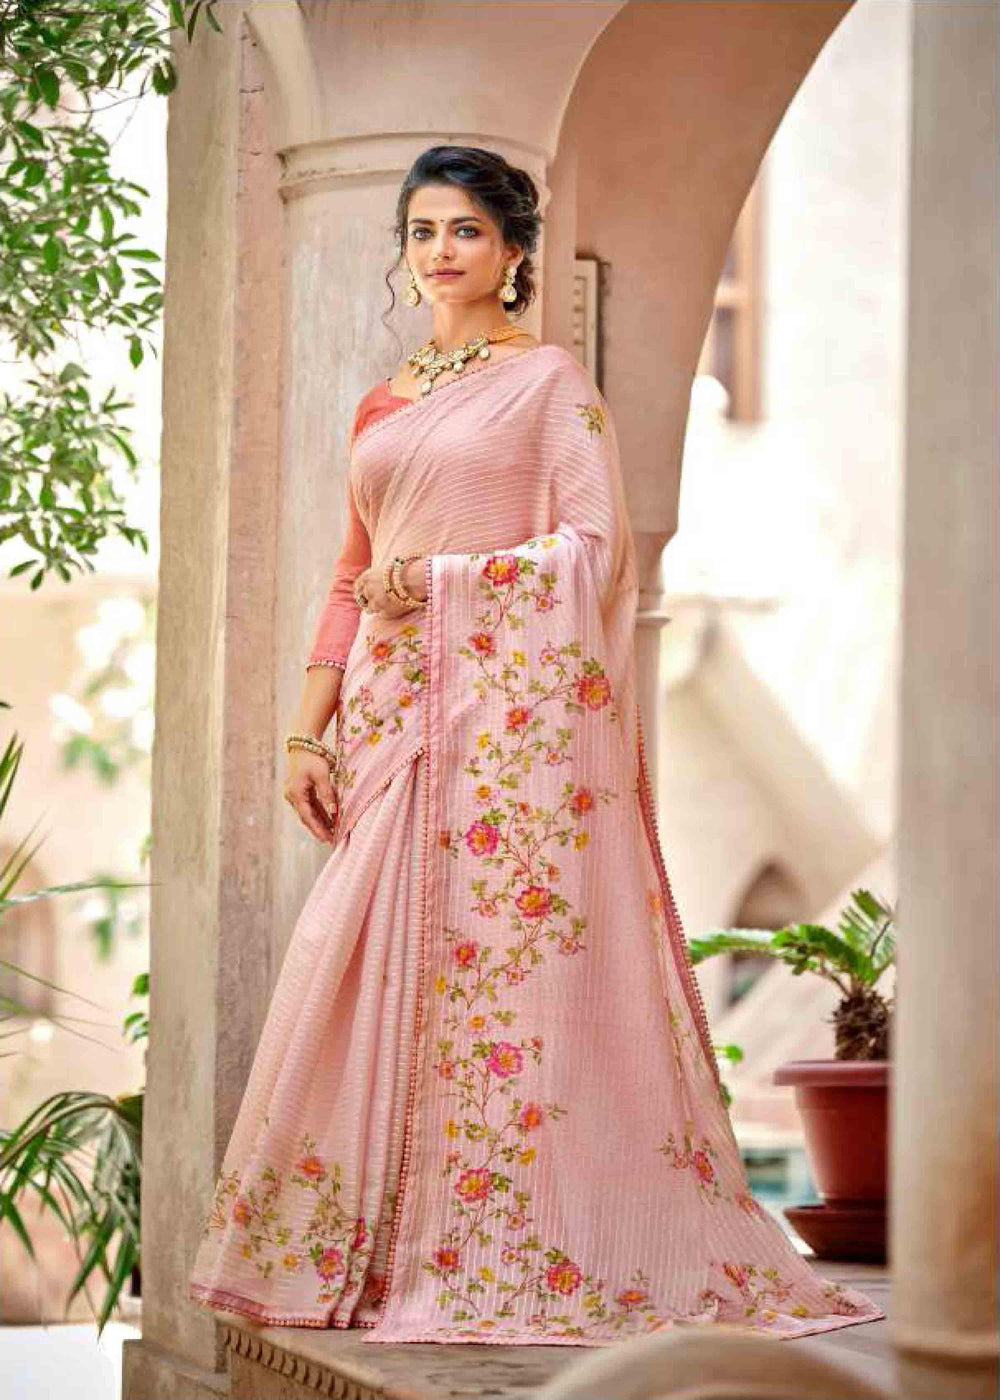 woman standing in floral jal crochet saree.